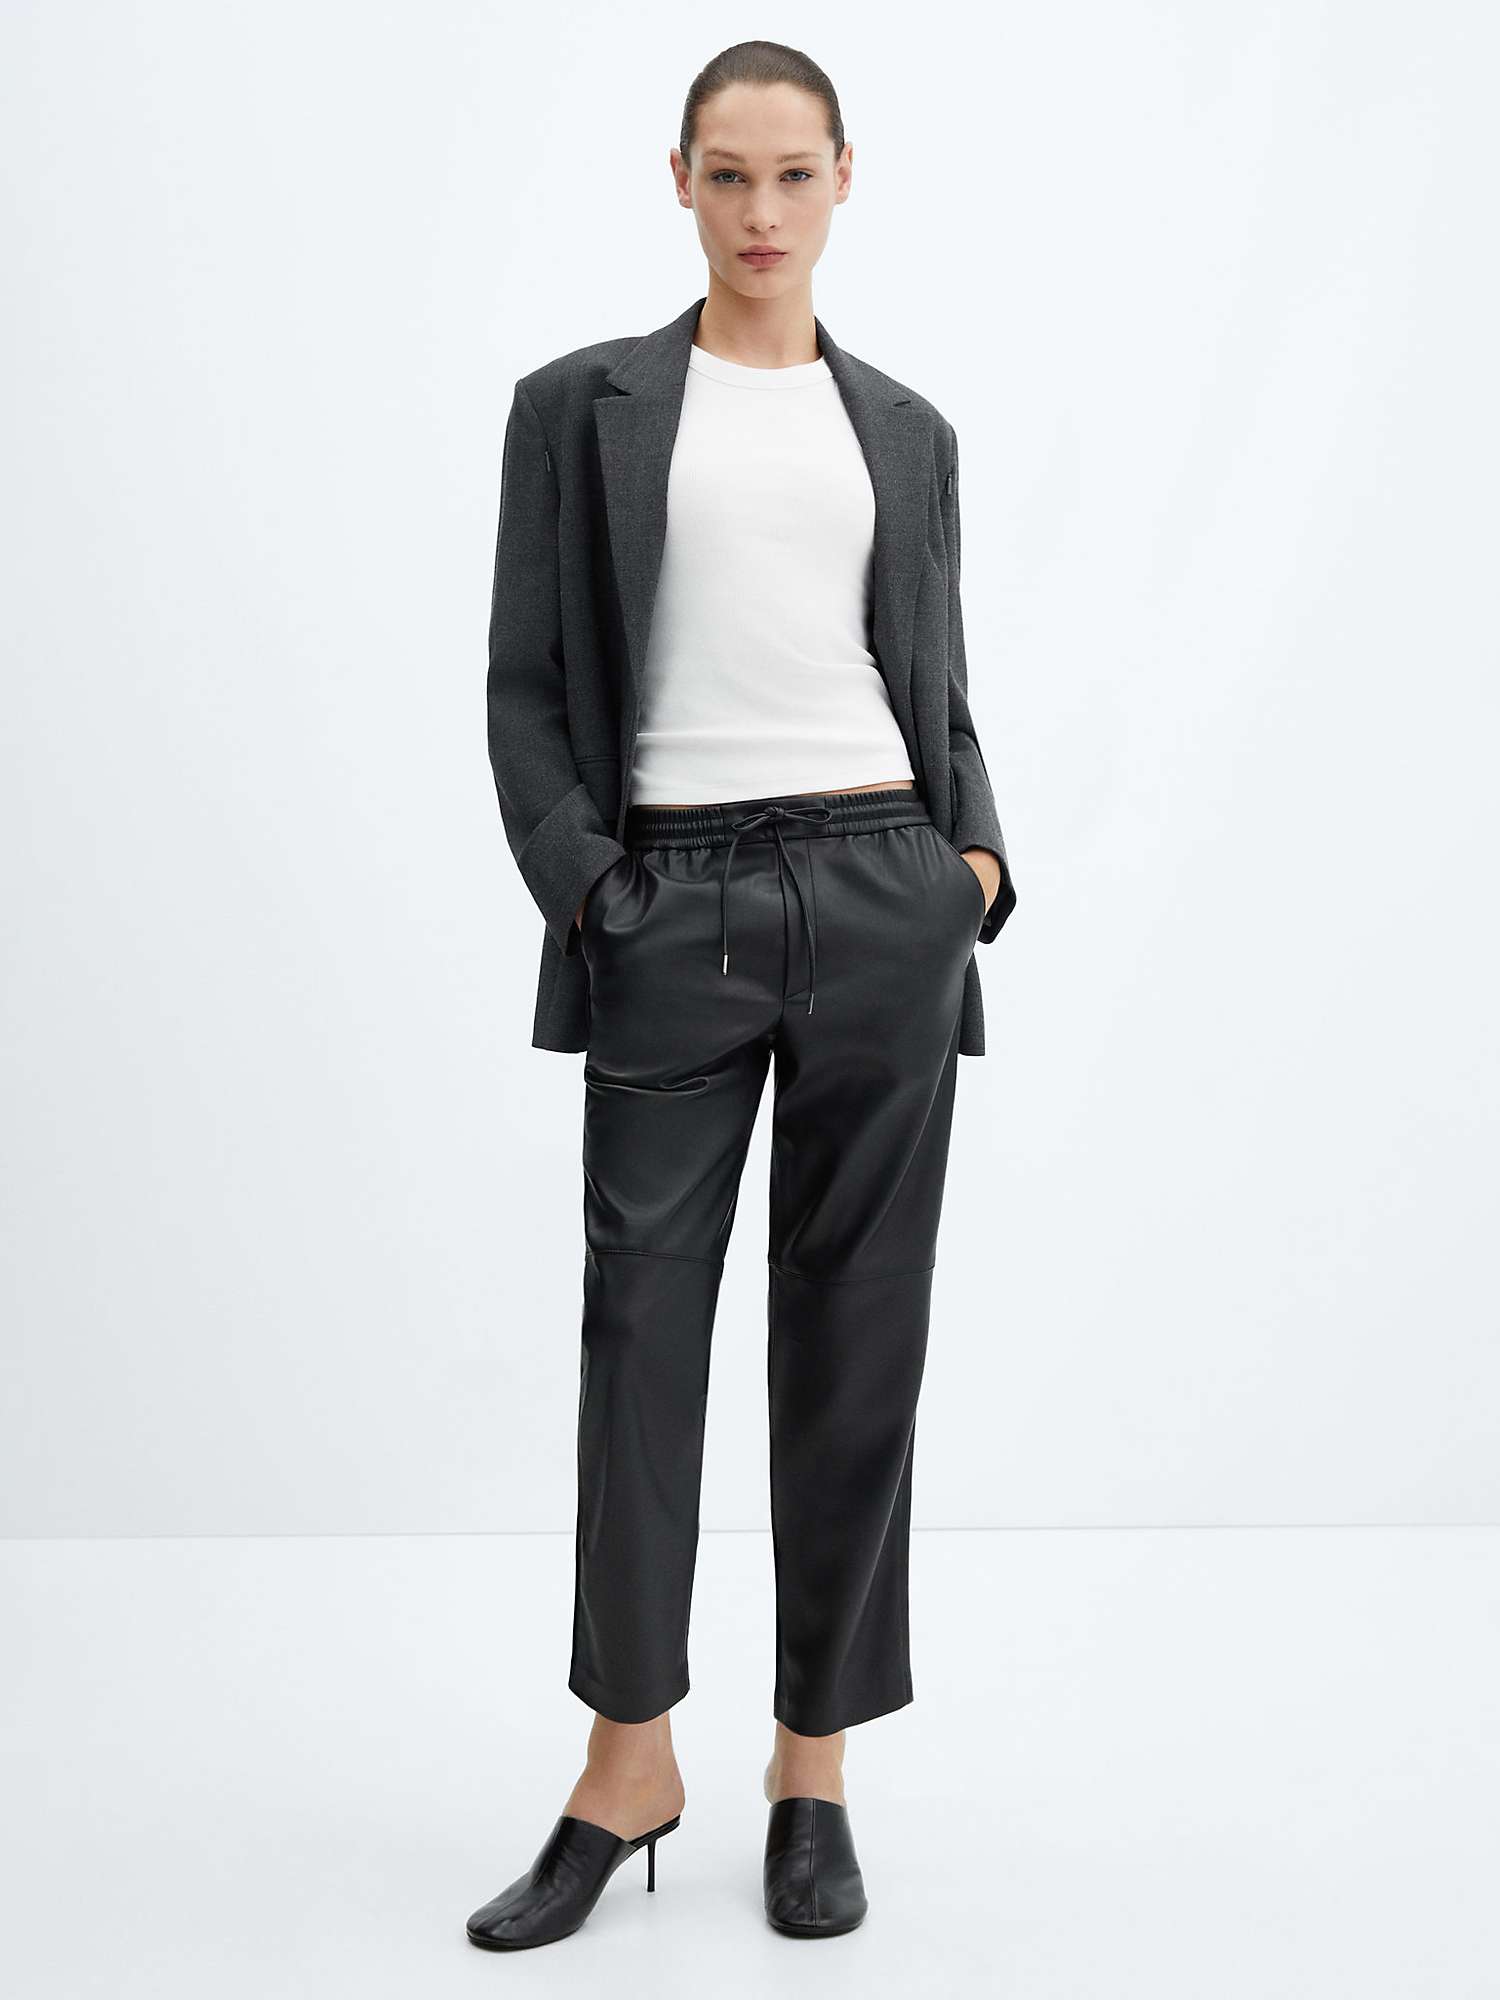 Buy Mango Apple Faux Leather Trousers, Black Online at johnlewis.com